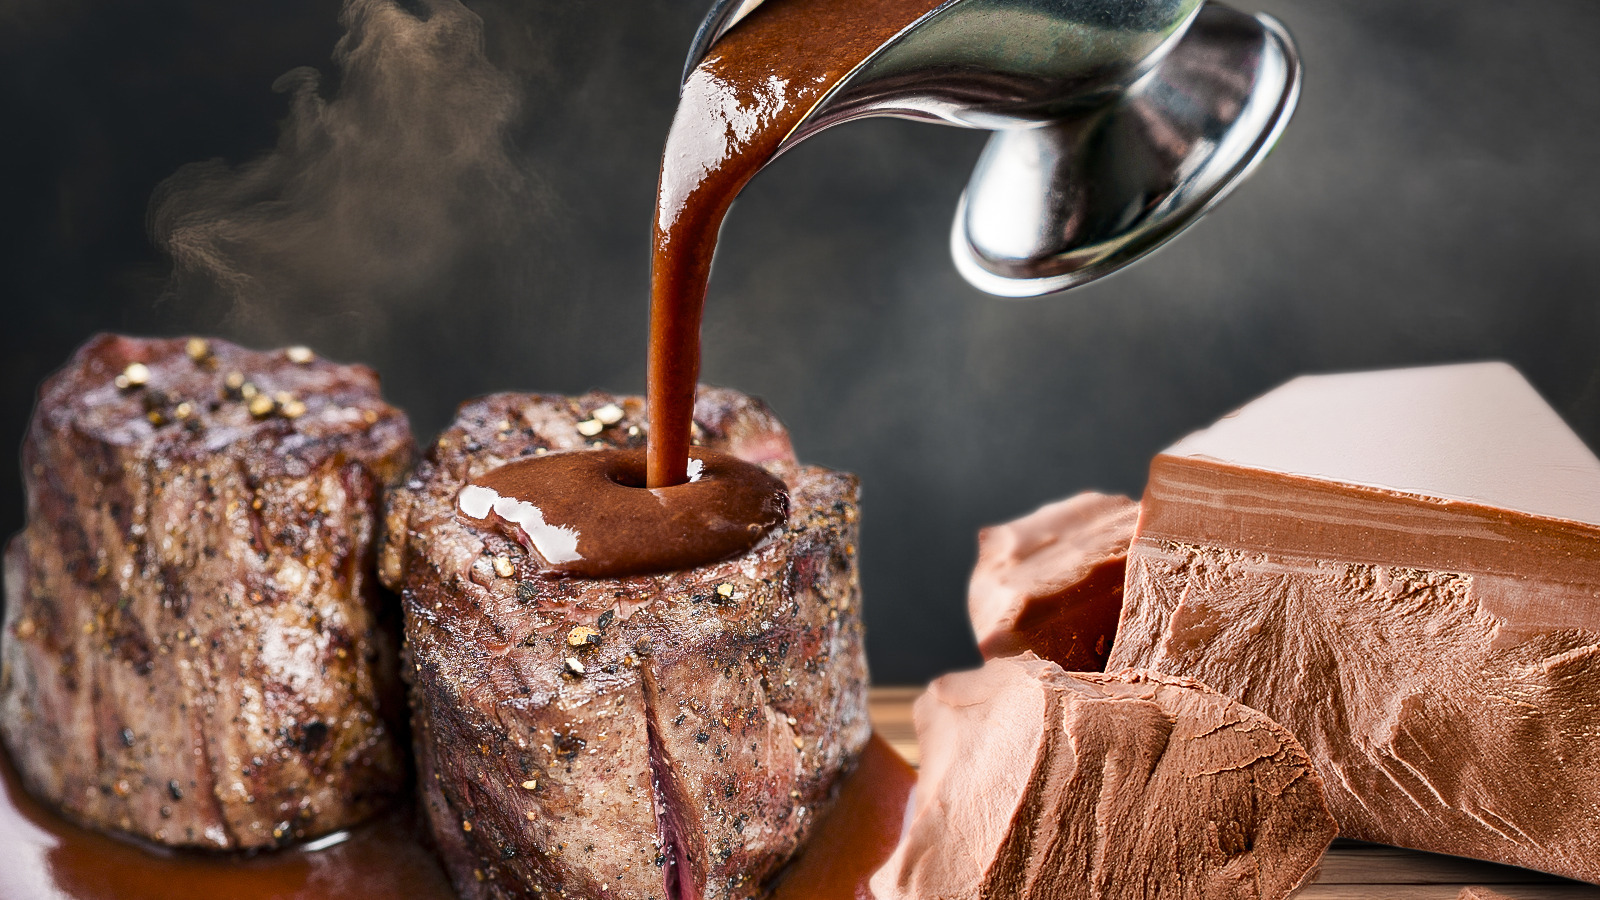 Chocolate and steak are an unlikely pairing that delivers rich results